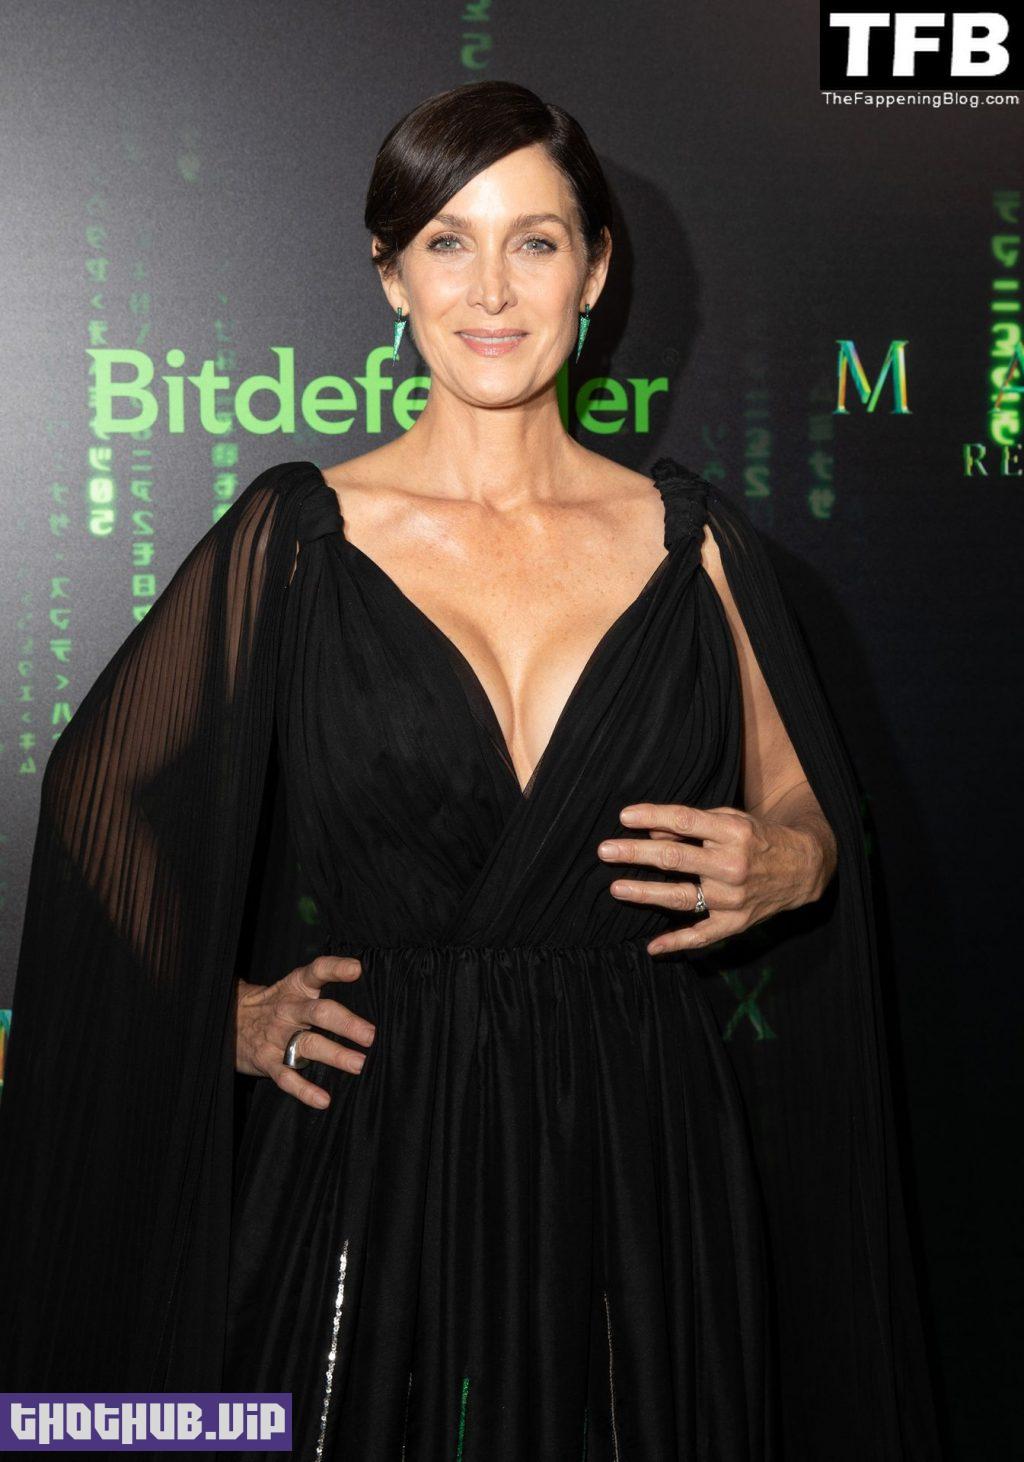 Carrie Anne Moss Sexy The Fappening Blog 12